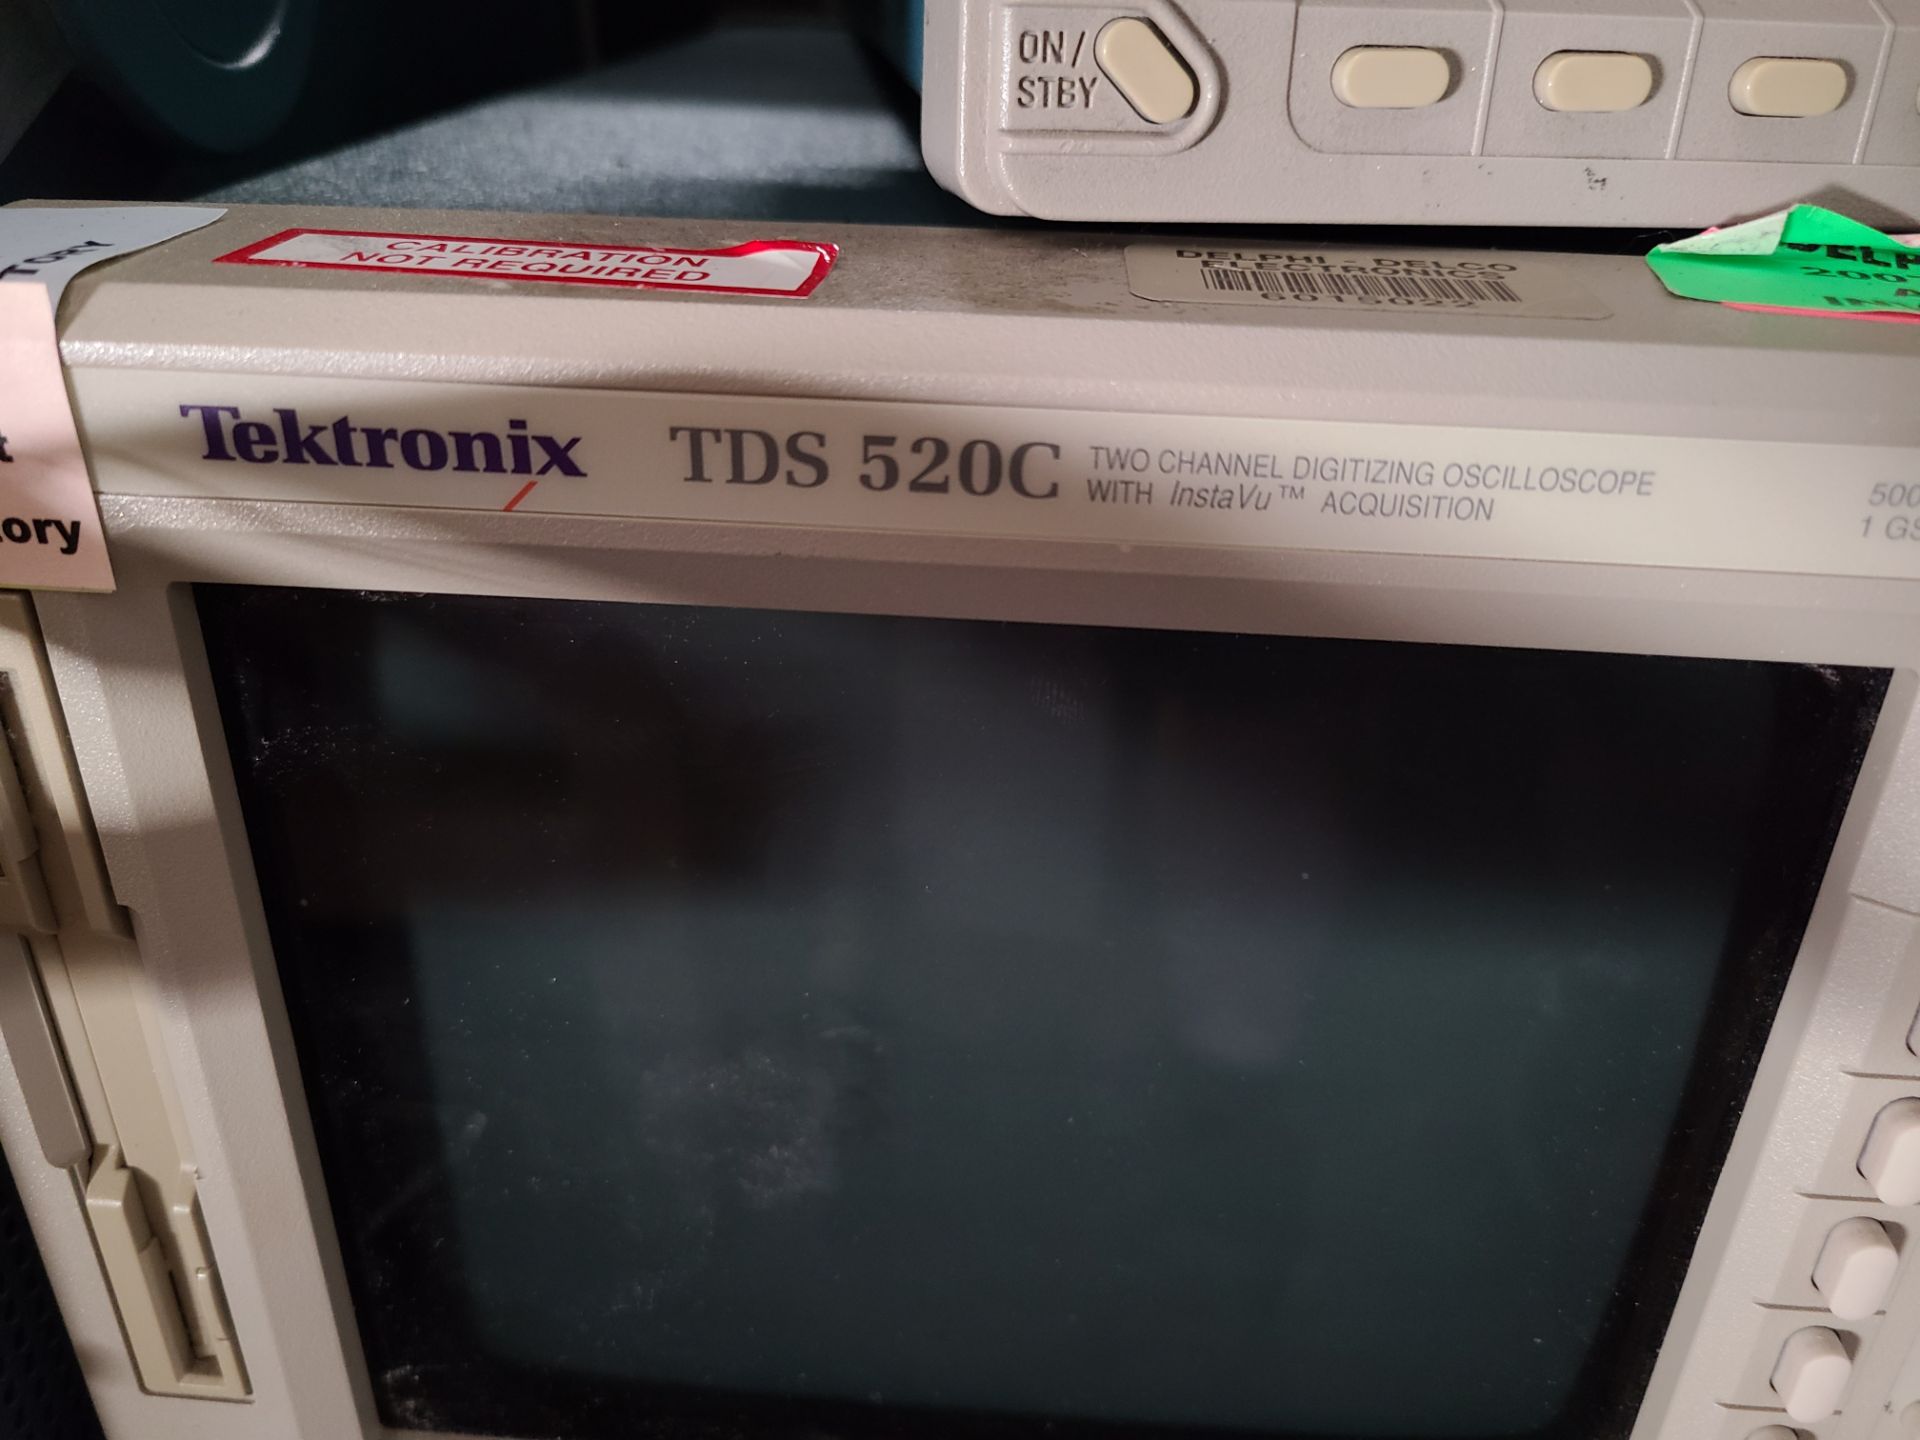 TEKTRONIX TDS 520C TWO CHANNEL DIGITIZING OSCILLOSCOPE WITH INSTAVU ACQUISITION - Image 2 of 2